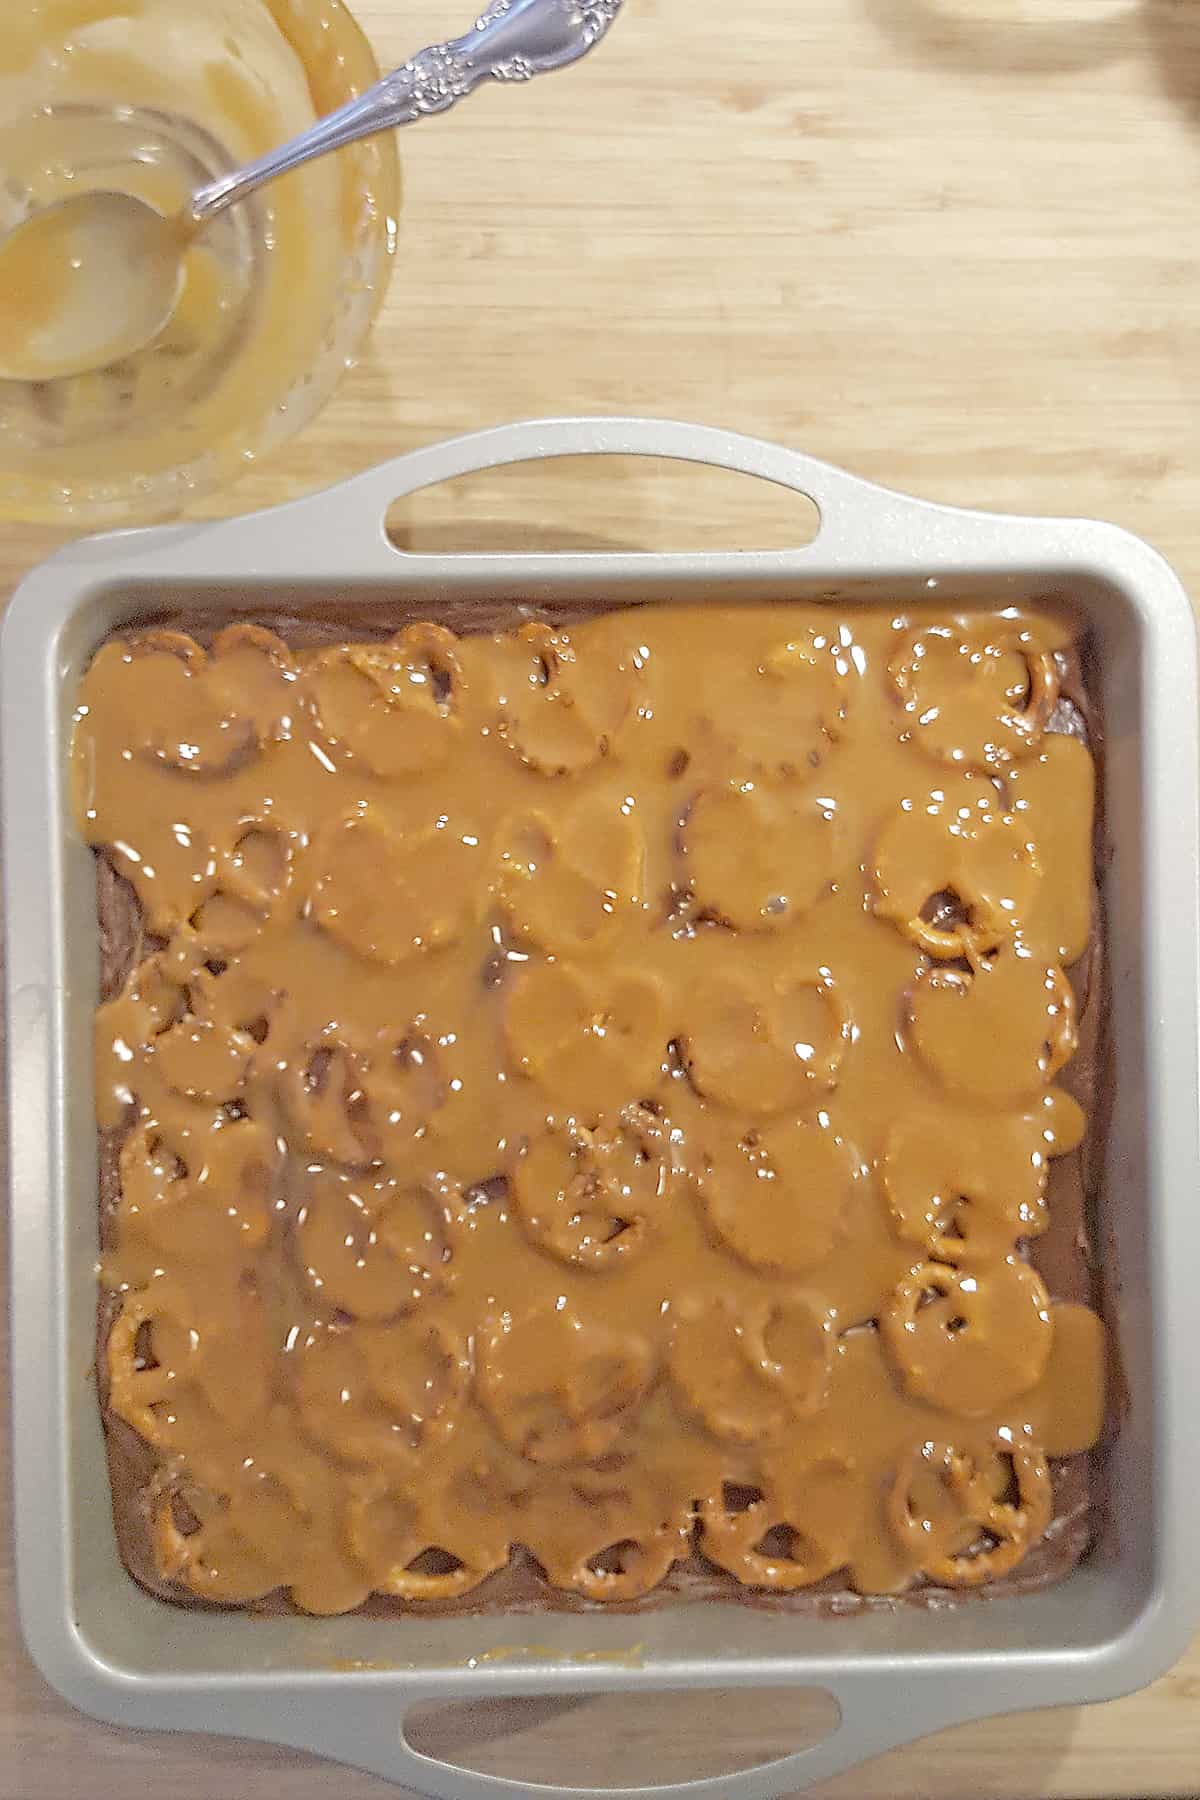 Brownies, milk chocolate frosting, and pretzels with a layer of melted caramel drizzled over.